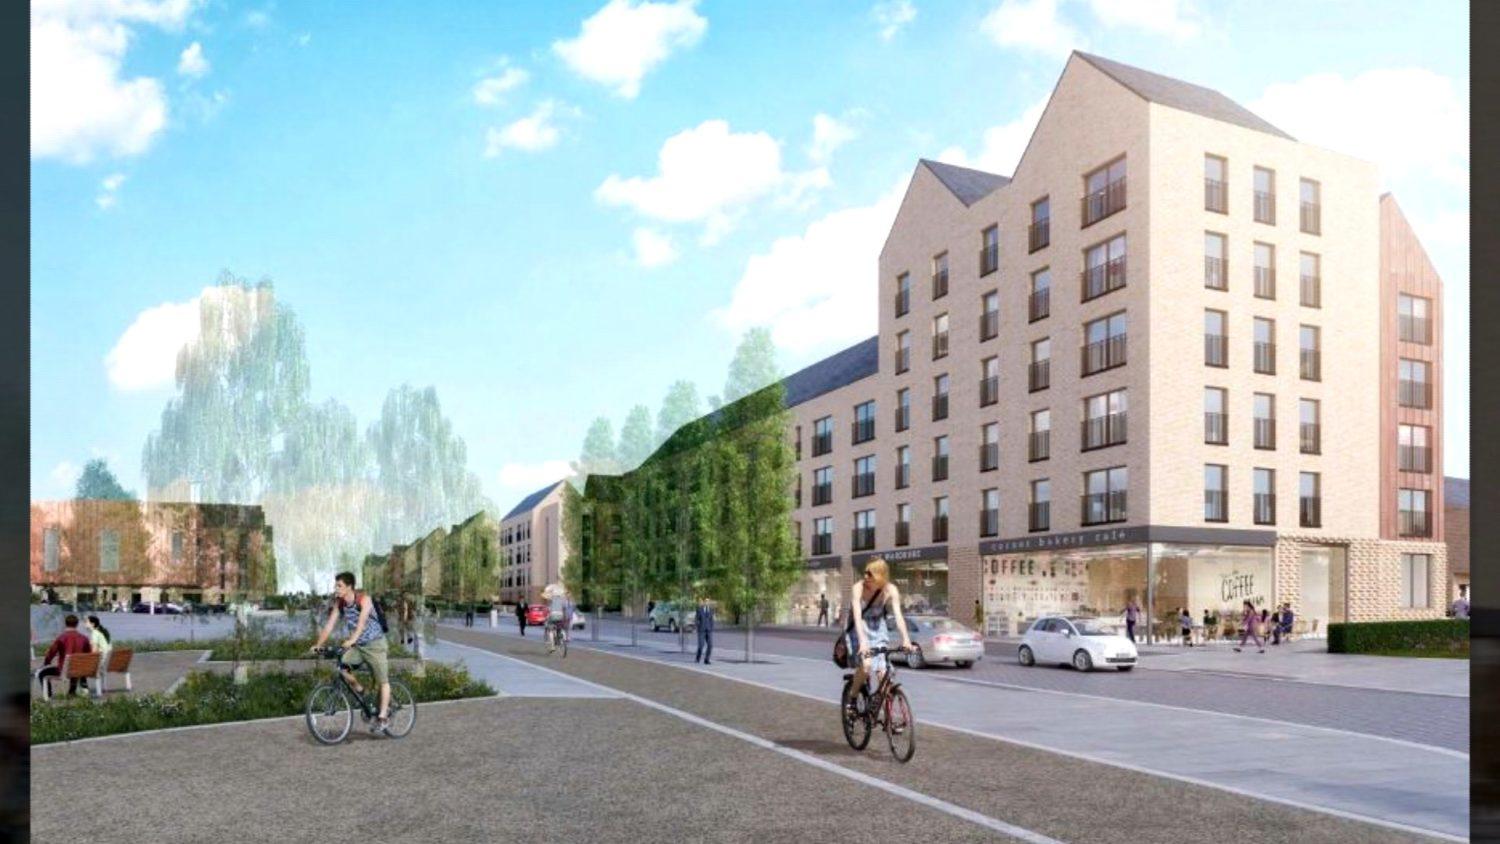 Work starts on 800 new homes as part of £250m development